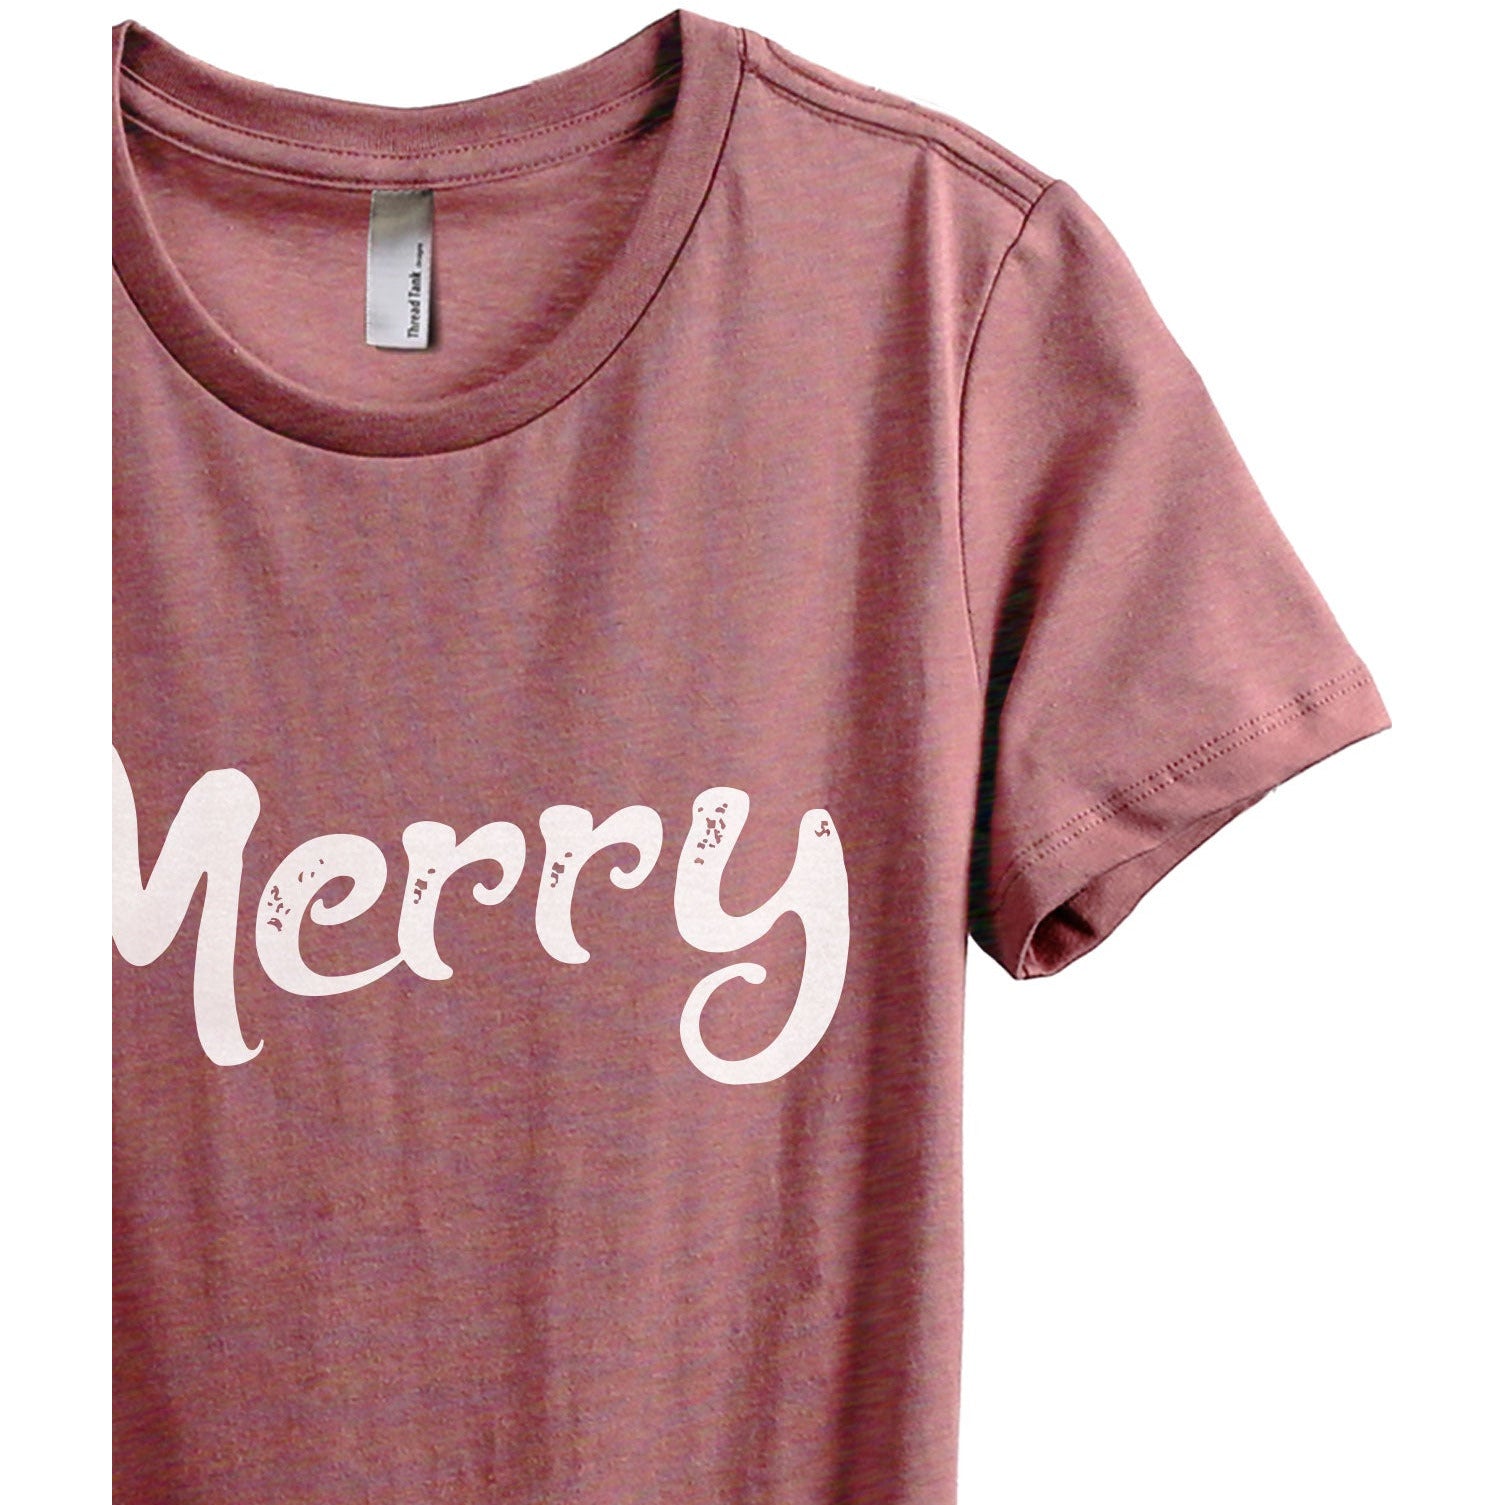 Very Merry - Stories You Can Wear